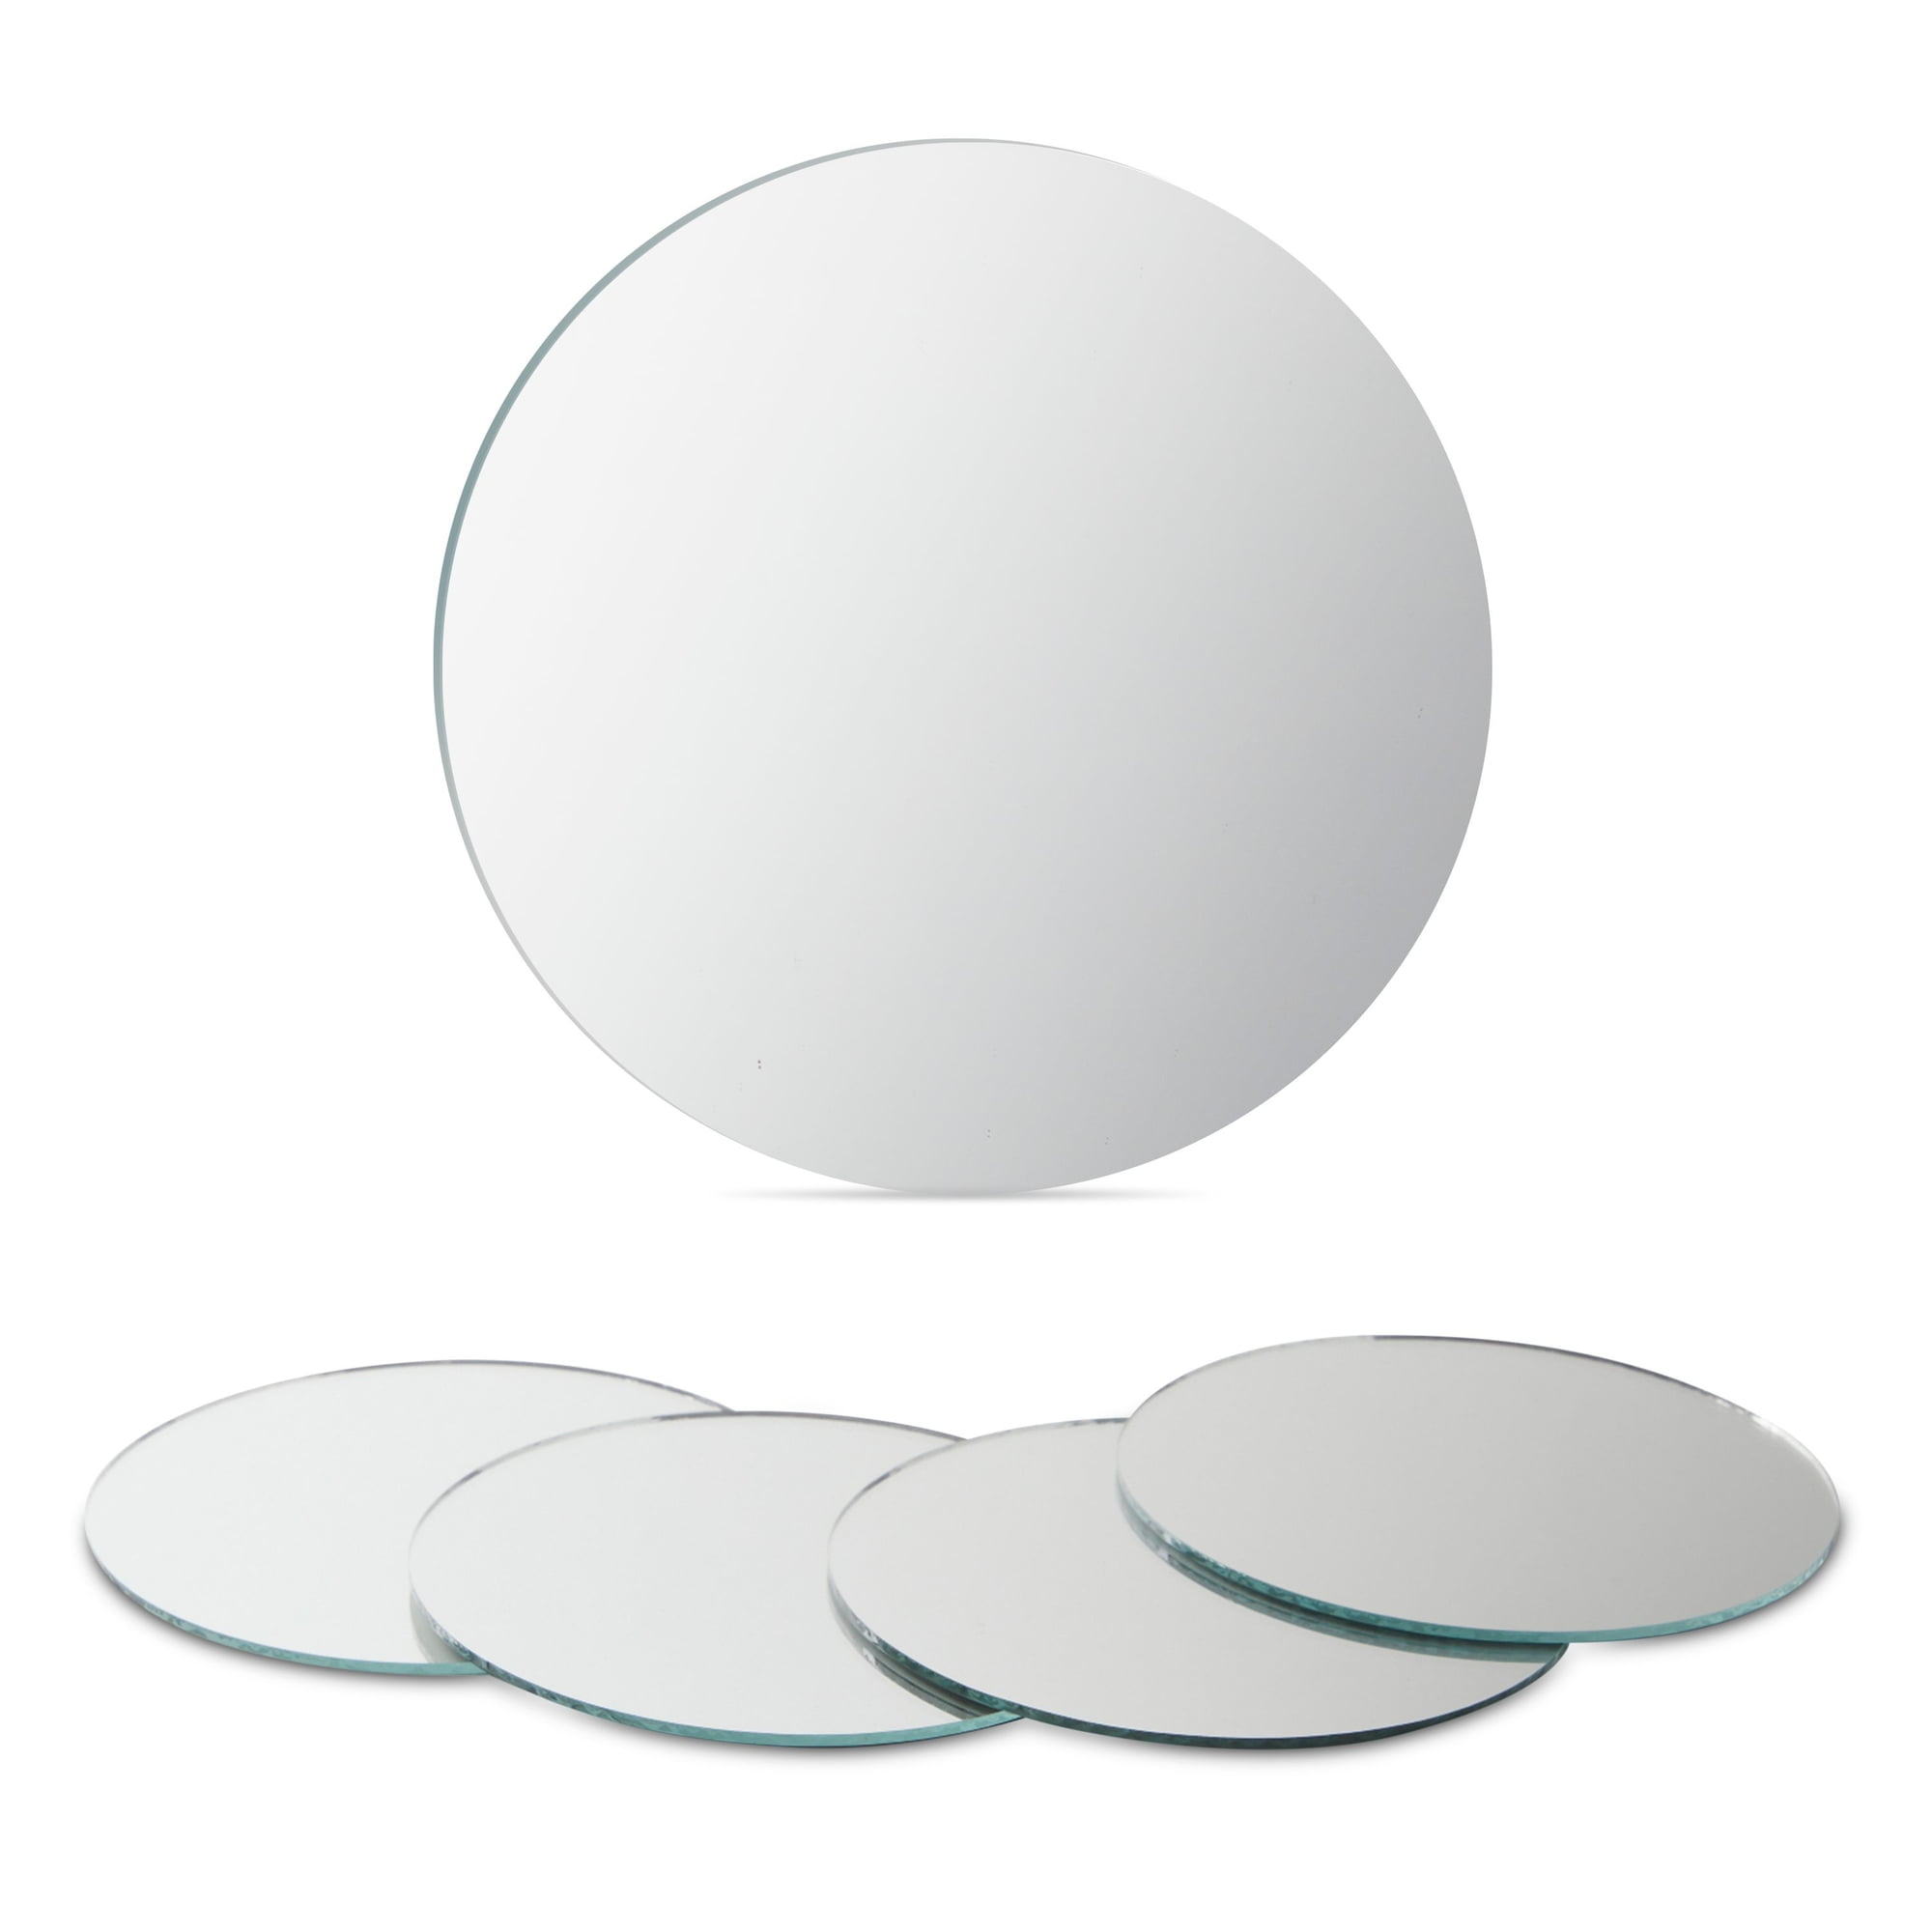 50 Pack Small Round Mirrors for Crafts, 3-Inch Tile Circles for Wall Decor,  Mosaics, DIY Projects, Home Decorations